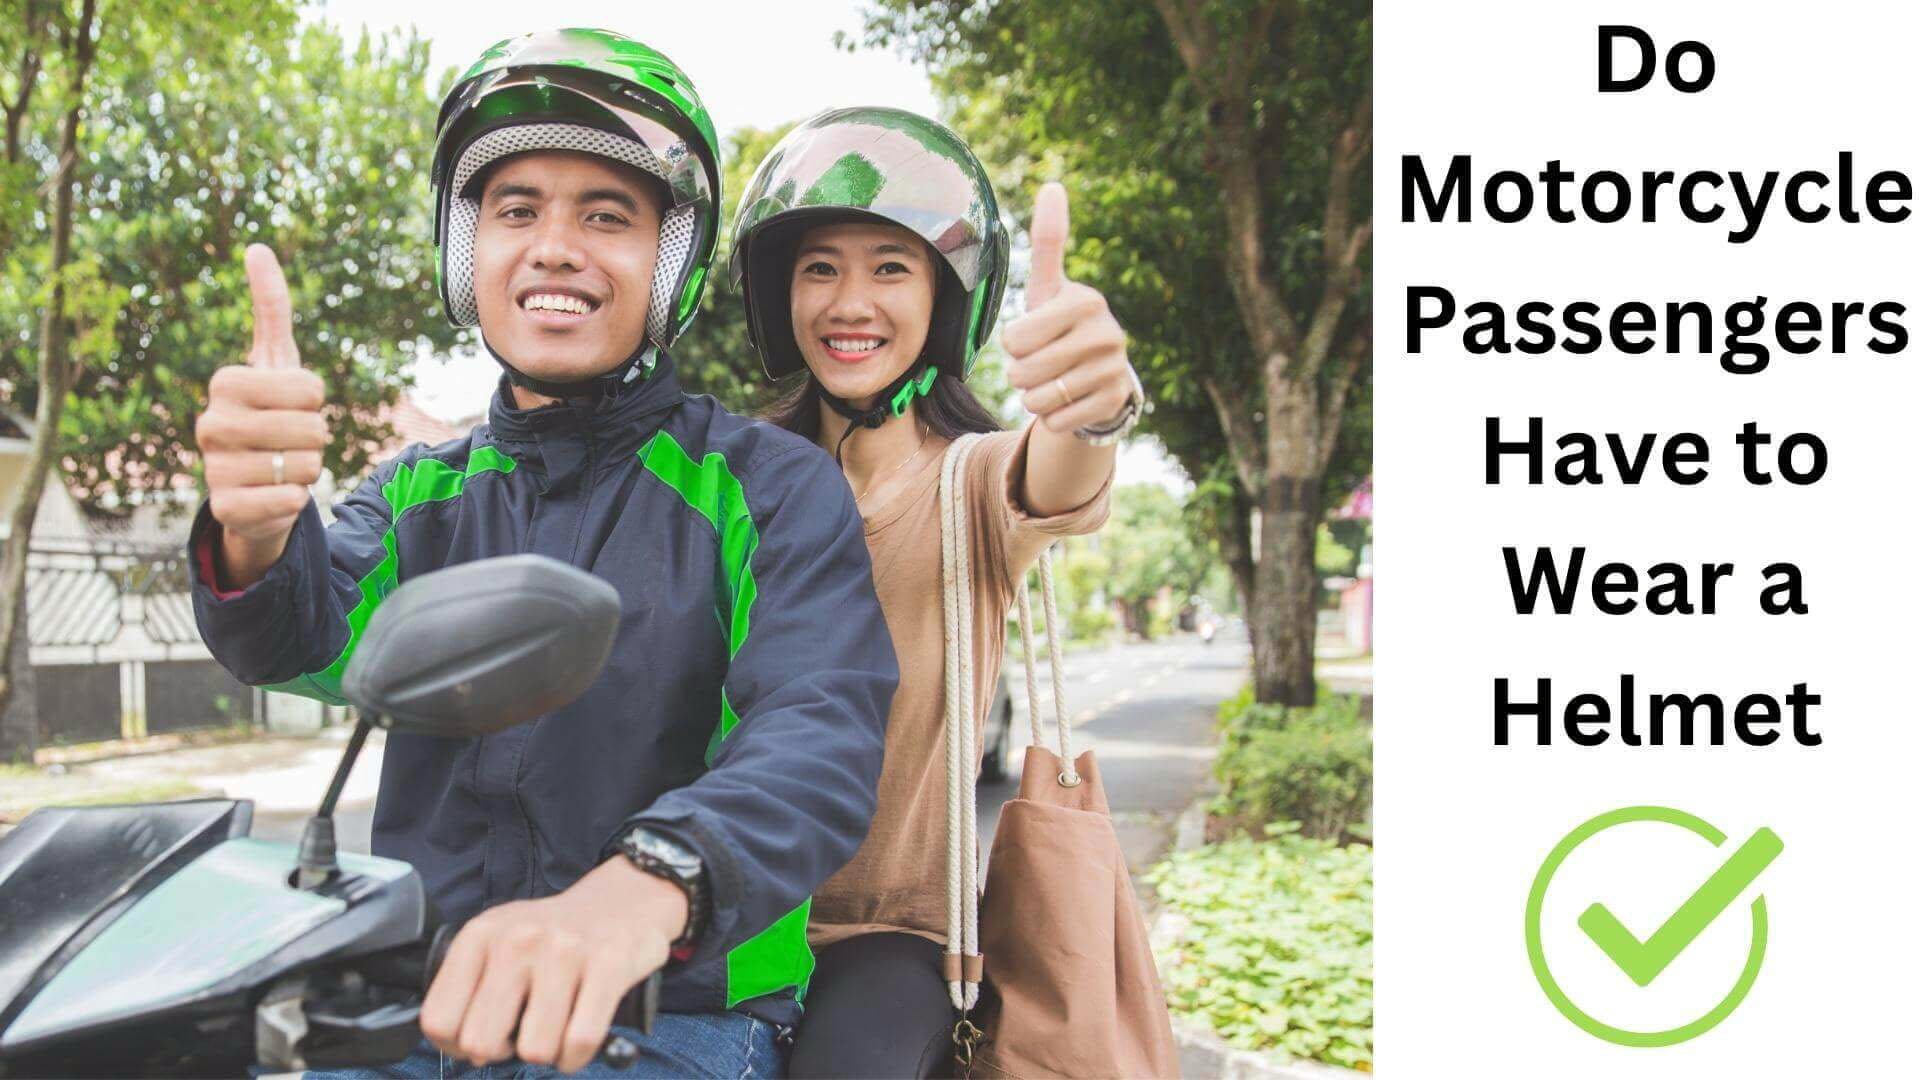 Do Motorcycle Passengers Have to Wear a Helmet?